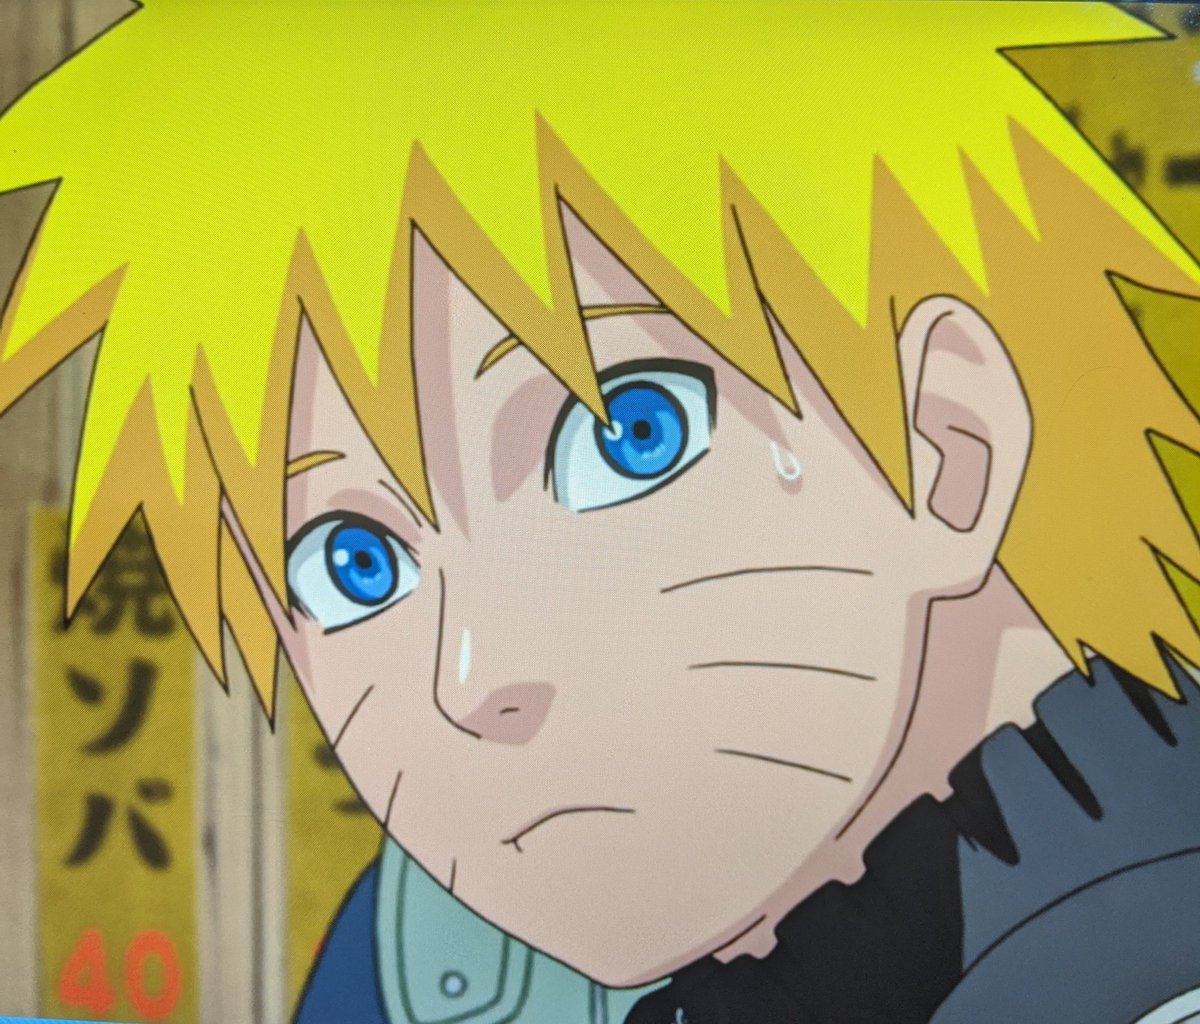 NARUTO'S FACE WHEN SOMEONE ASKED HIM FOR AN AUTOGRAPH :((( BABIE :(((